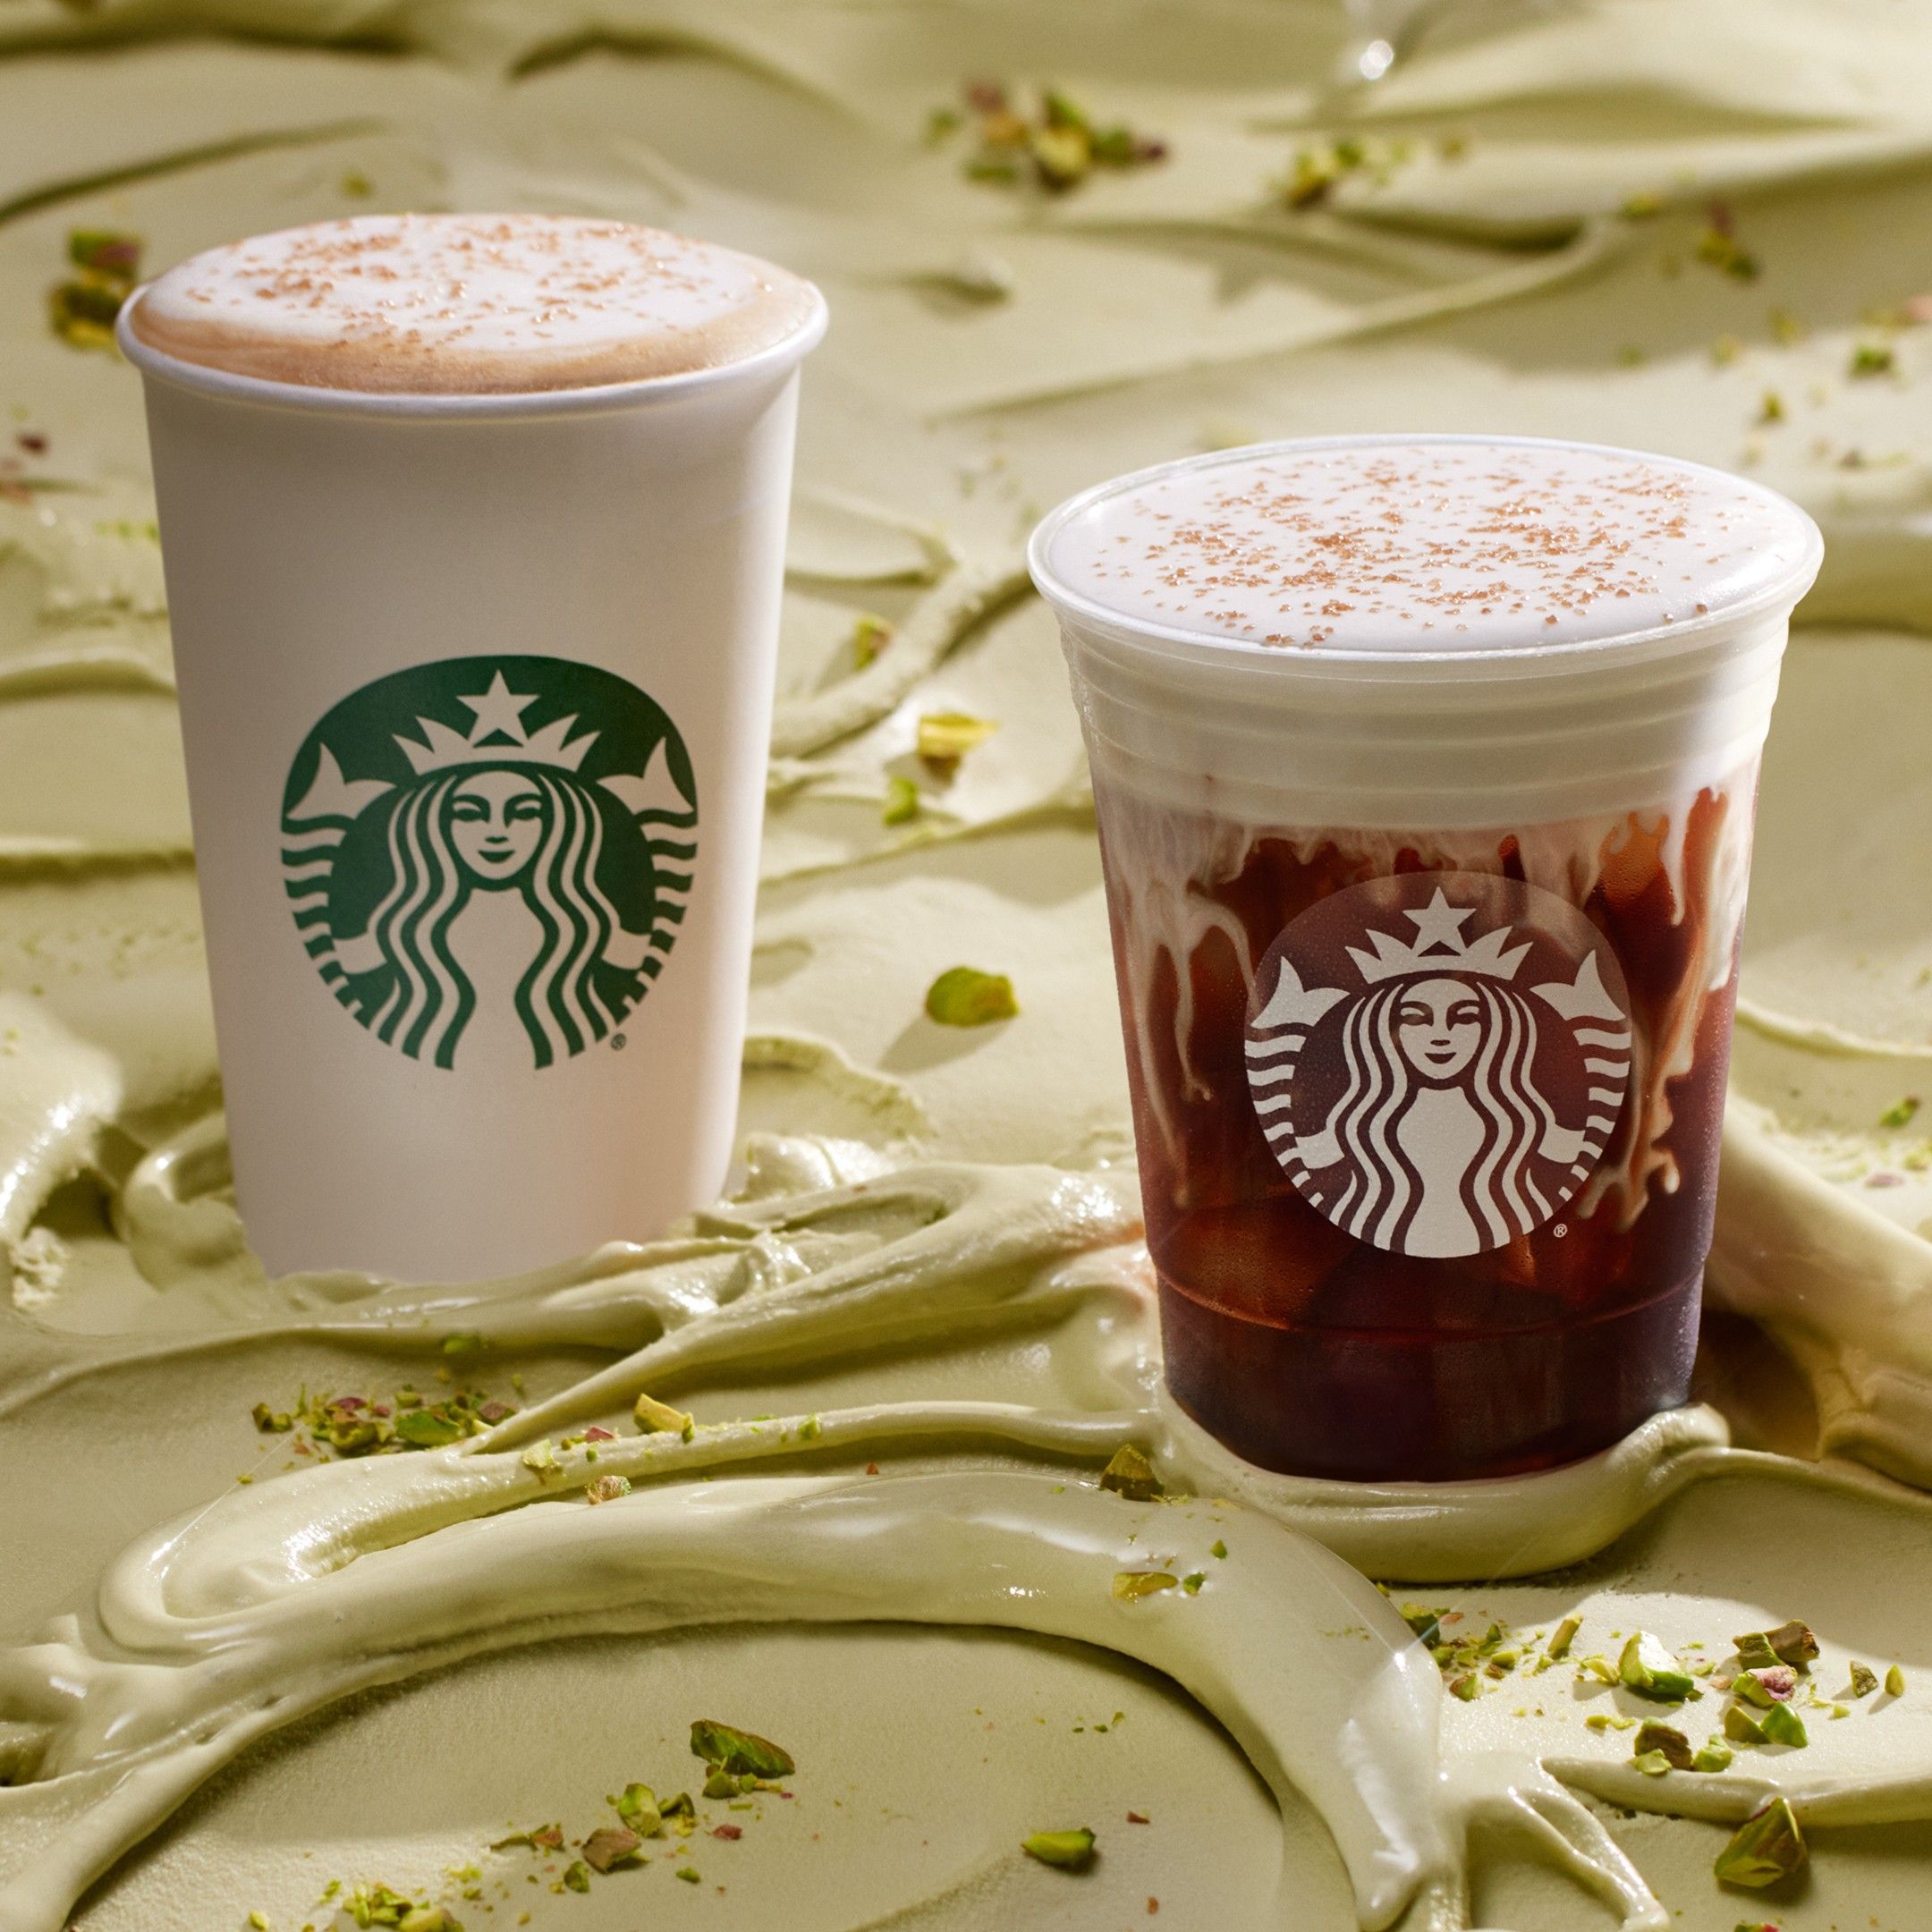 You can finally use a reusable cup on most Starbucks orders